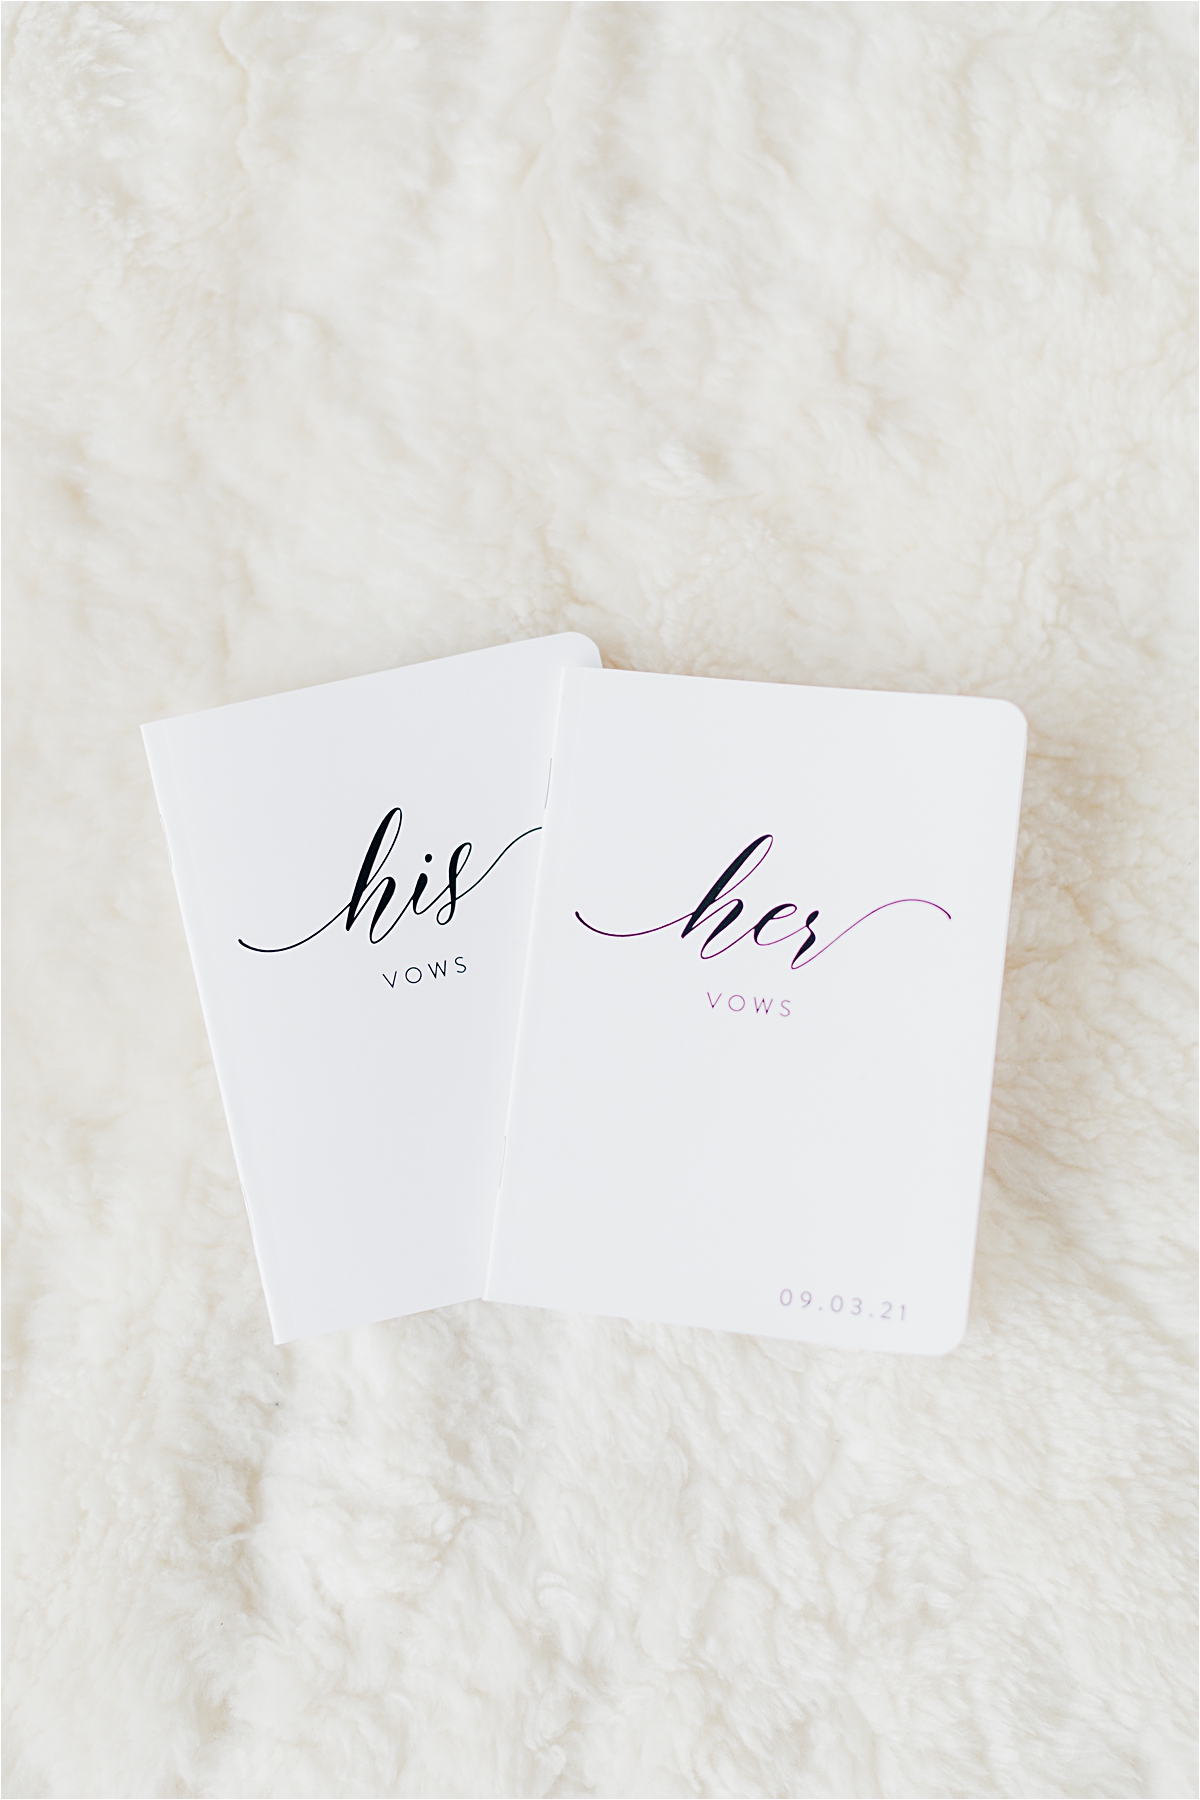 white and black vow books